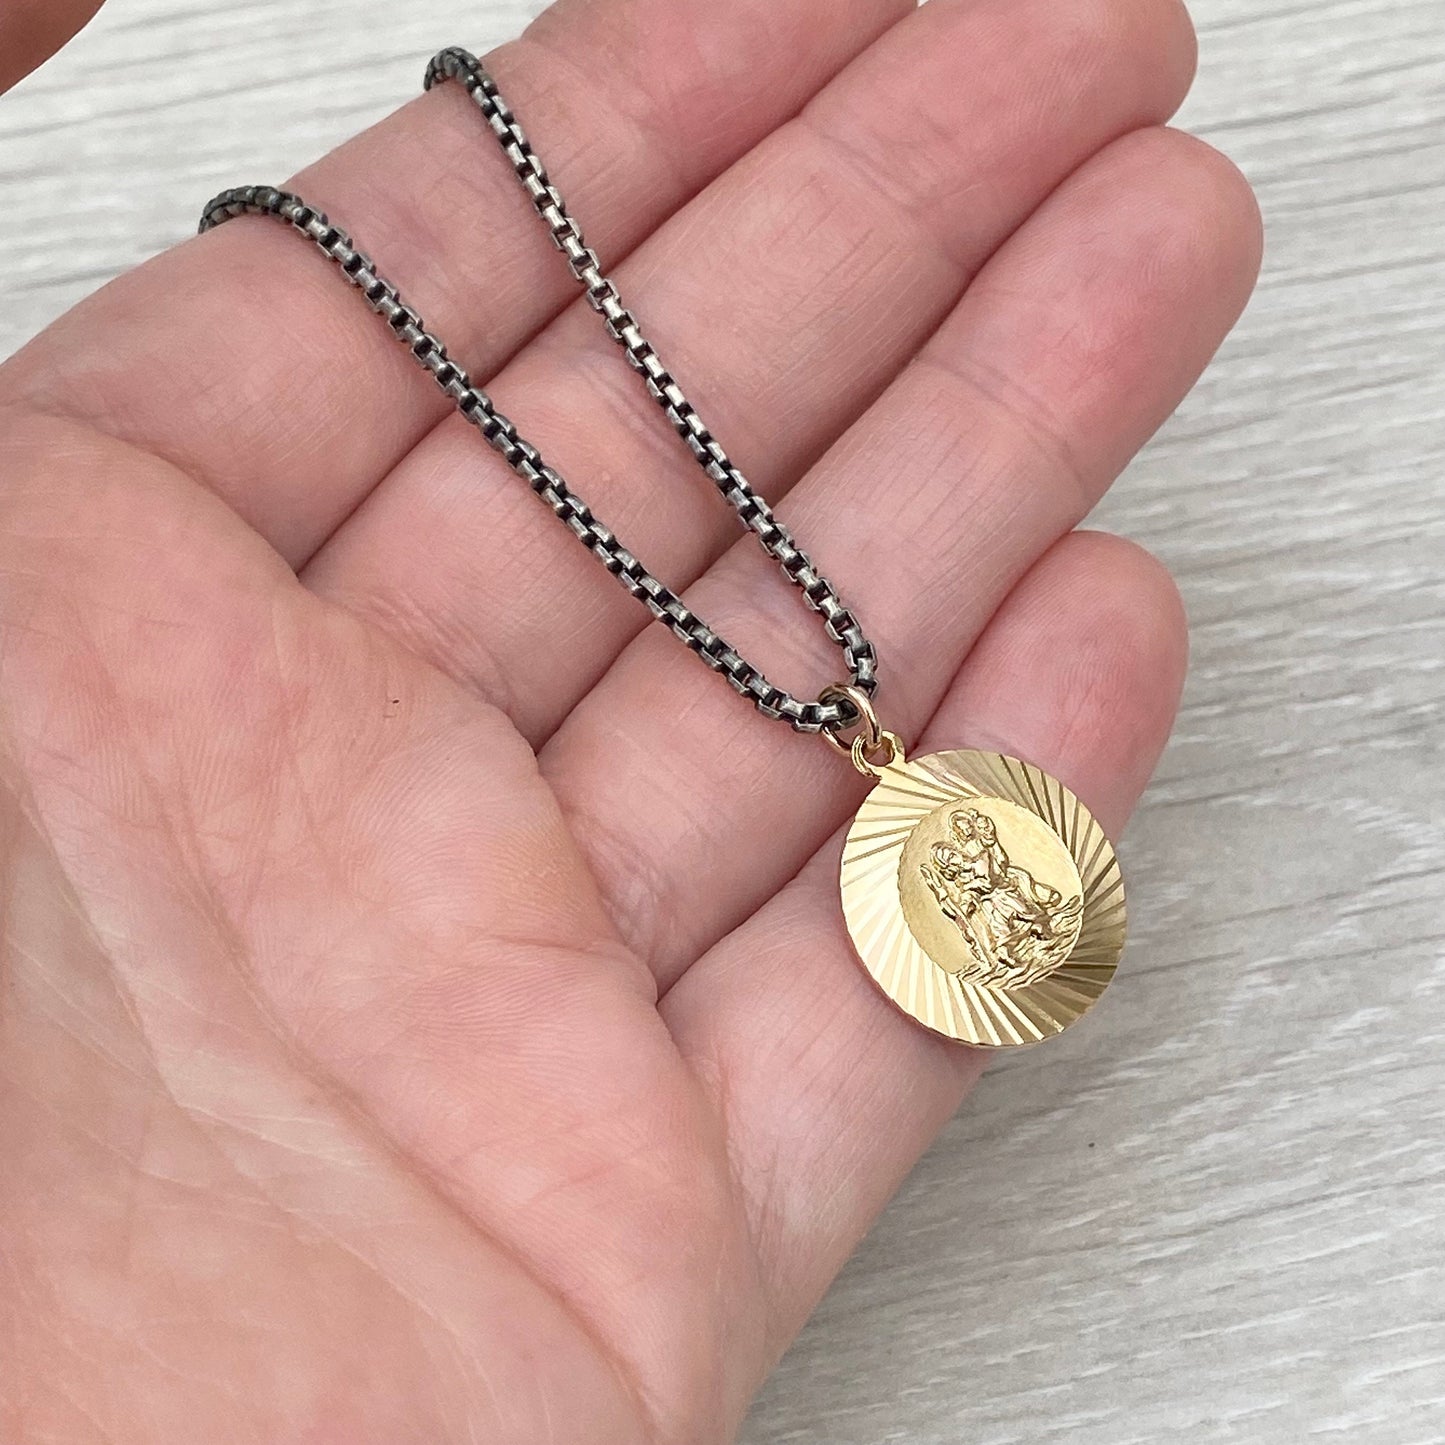 Vintage 9ct yellow gold Saint Christopher pendant - 9k yellow gold - New oxidised silver 2mm round box chain - British vintage jewellery